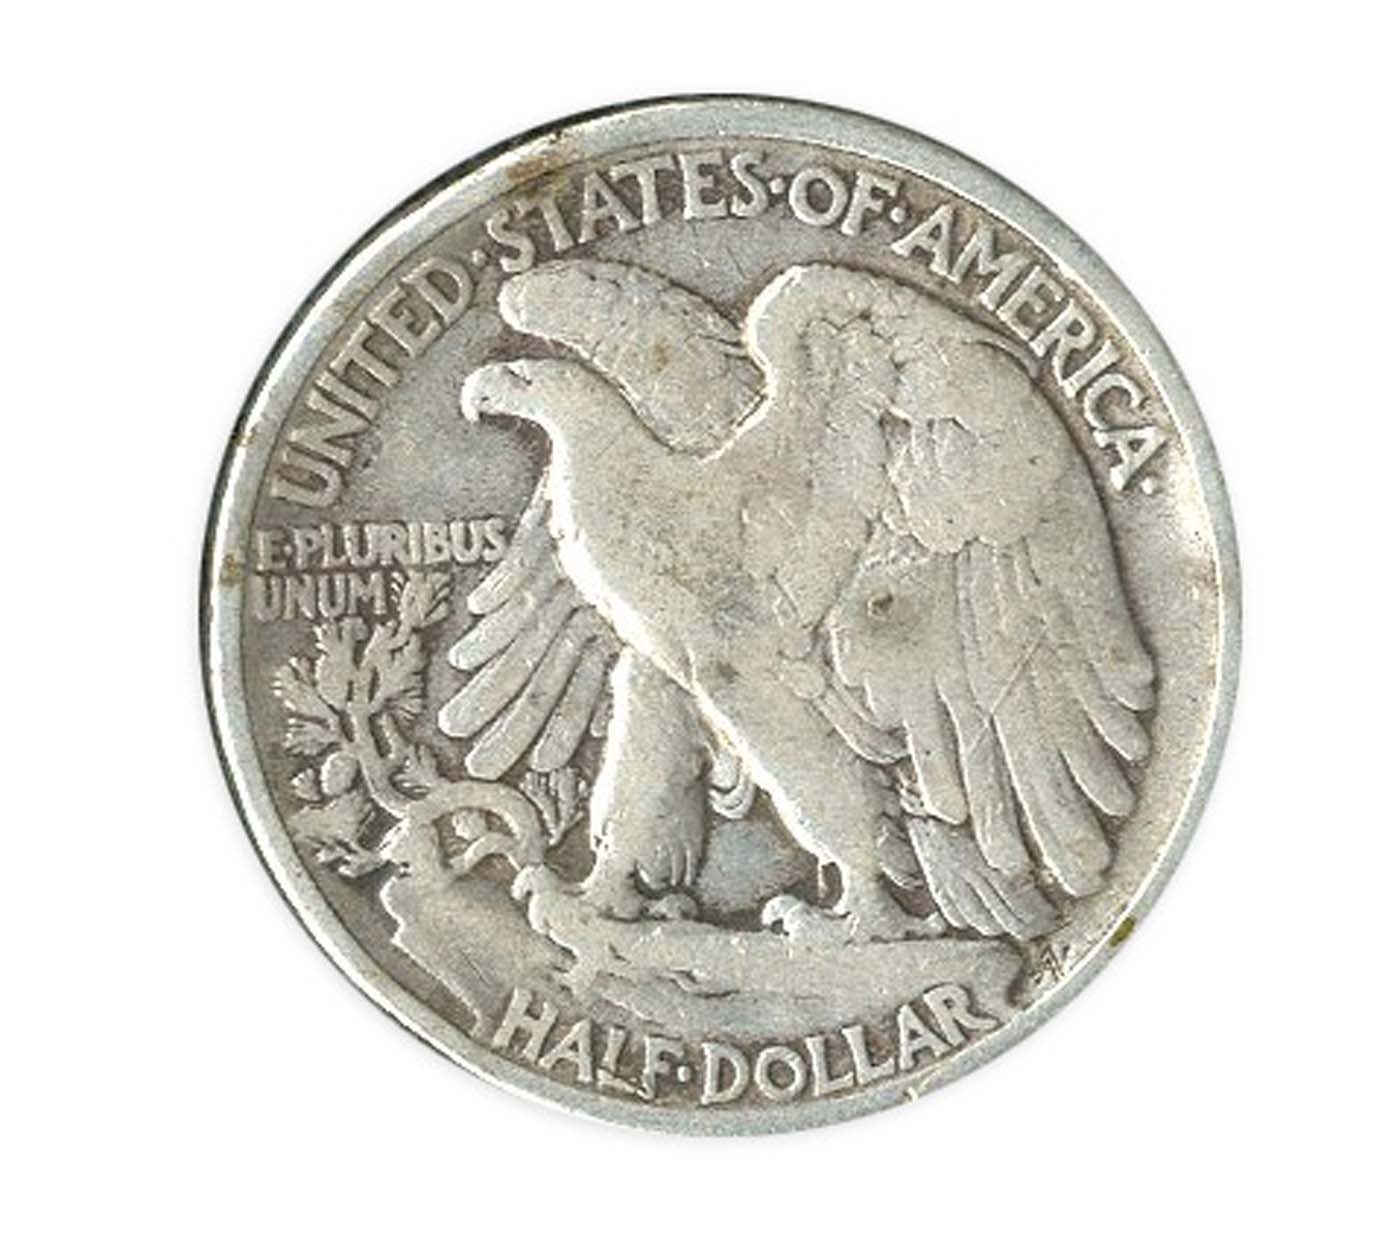 Rock And Pop Culture - 1962 "Nassau Agreement" Walking Liberty Half Dollar Gifted by John F. Kennedy